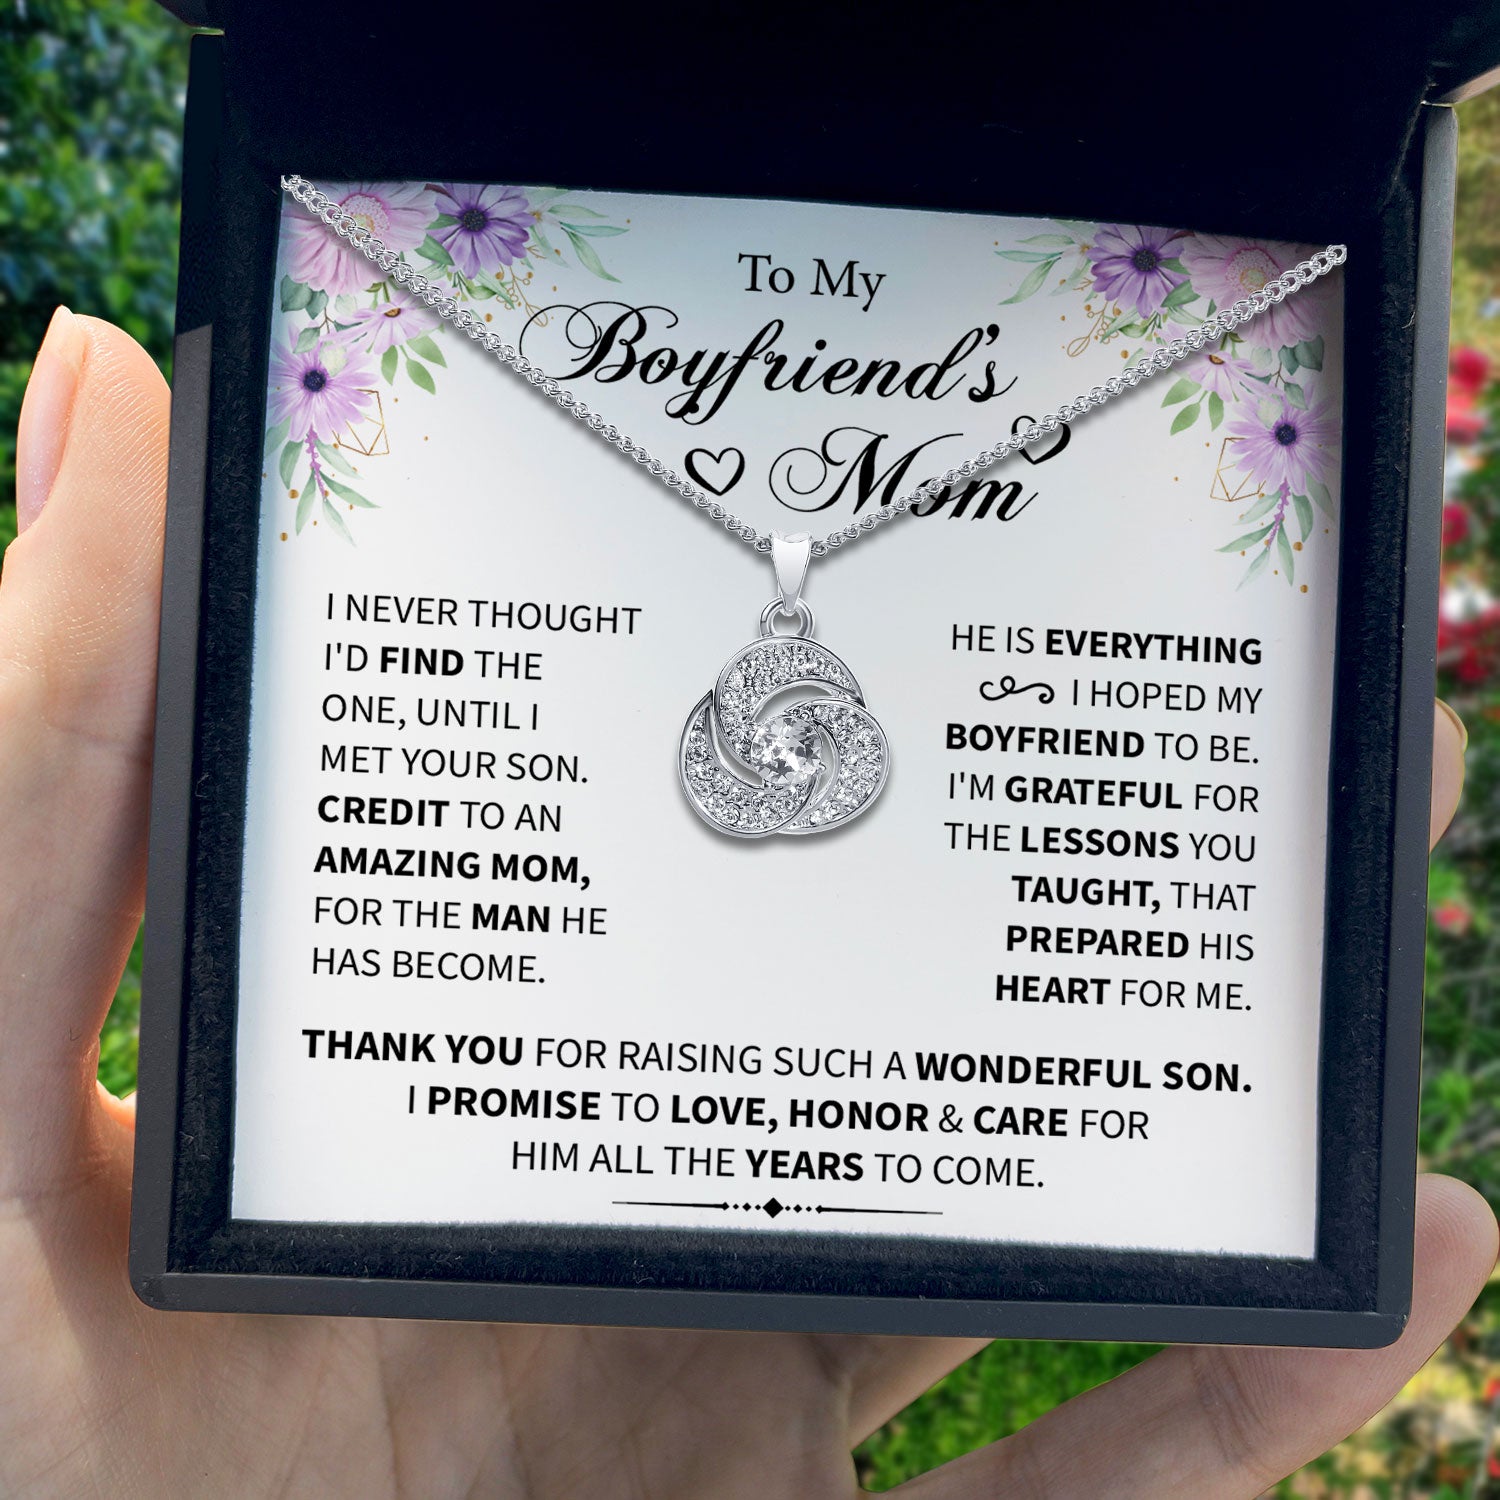 To My Boyfriend's Mom - I Promise To Love, Honor & Care For Him - Tryndi Love Knot Necklace